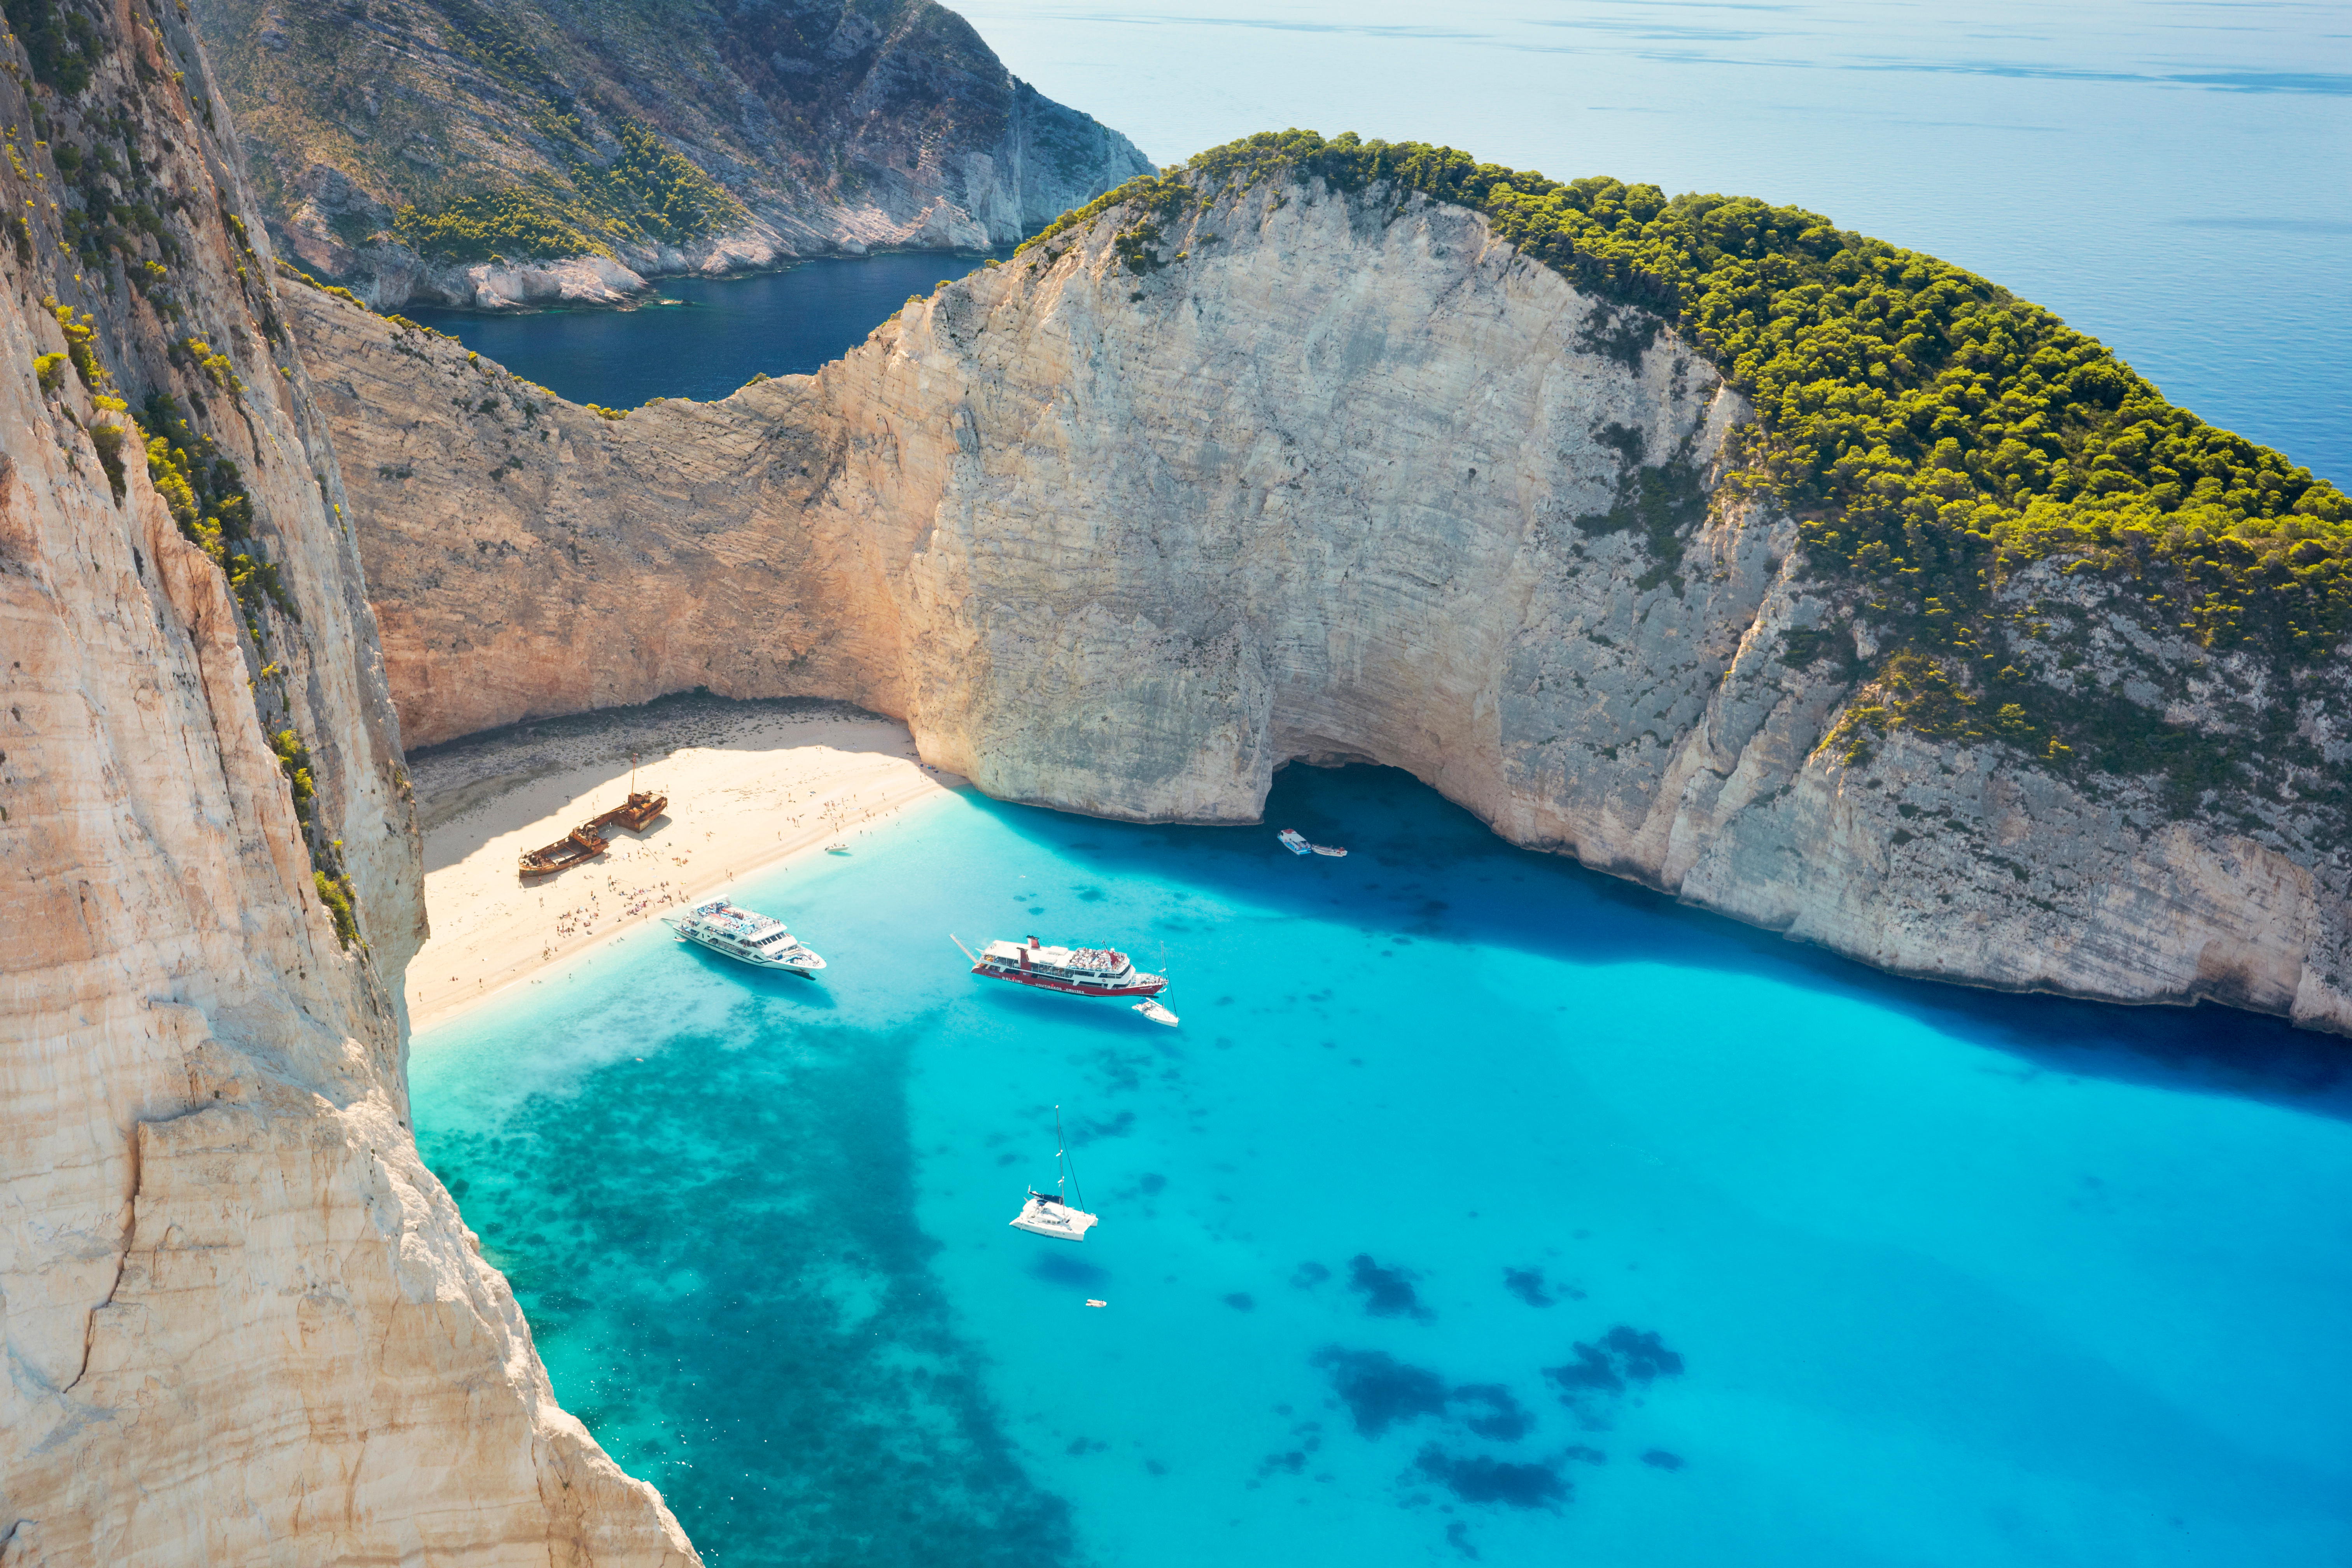 Navagio Beach, or “Shipwreck Beach” is a stunning cove in the remote northwest of Zakynthos island